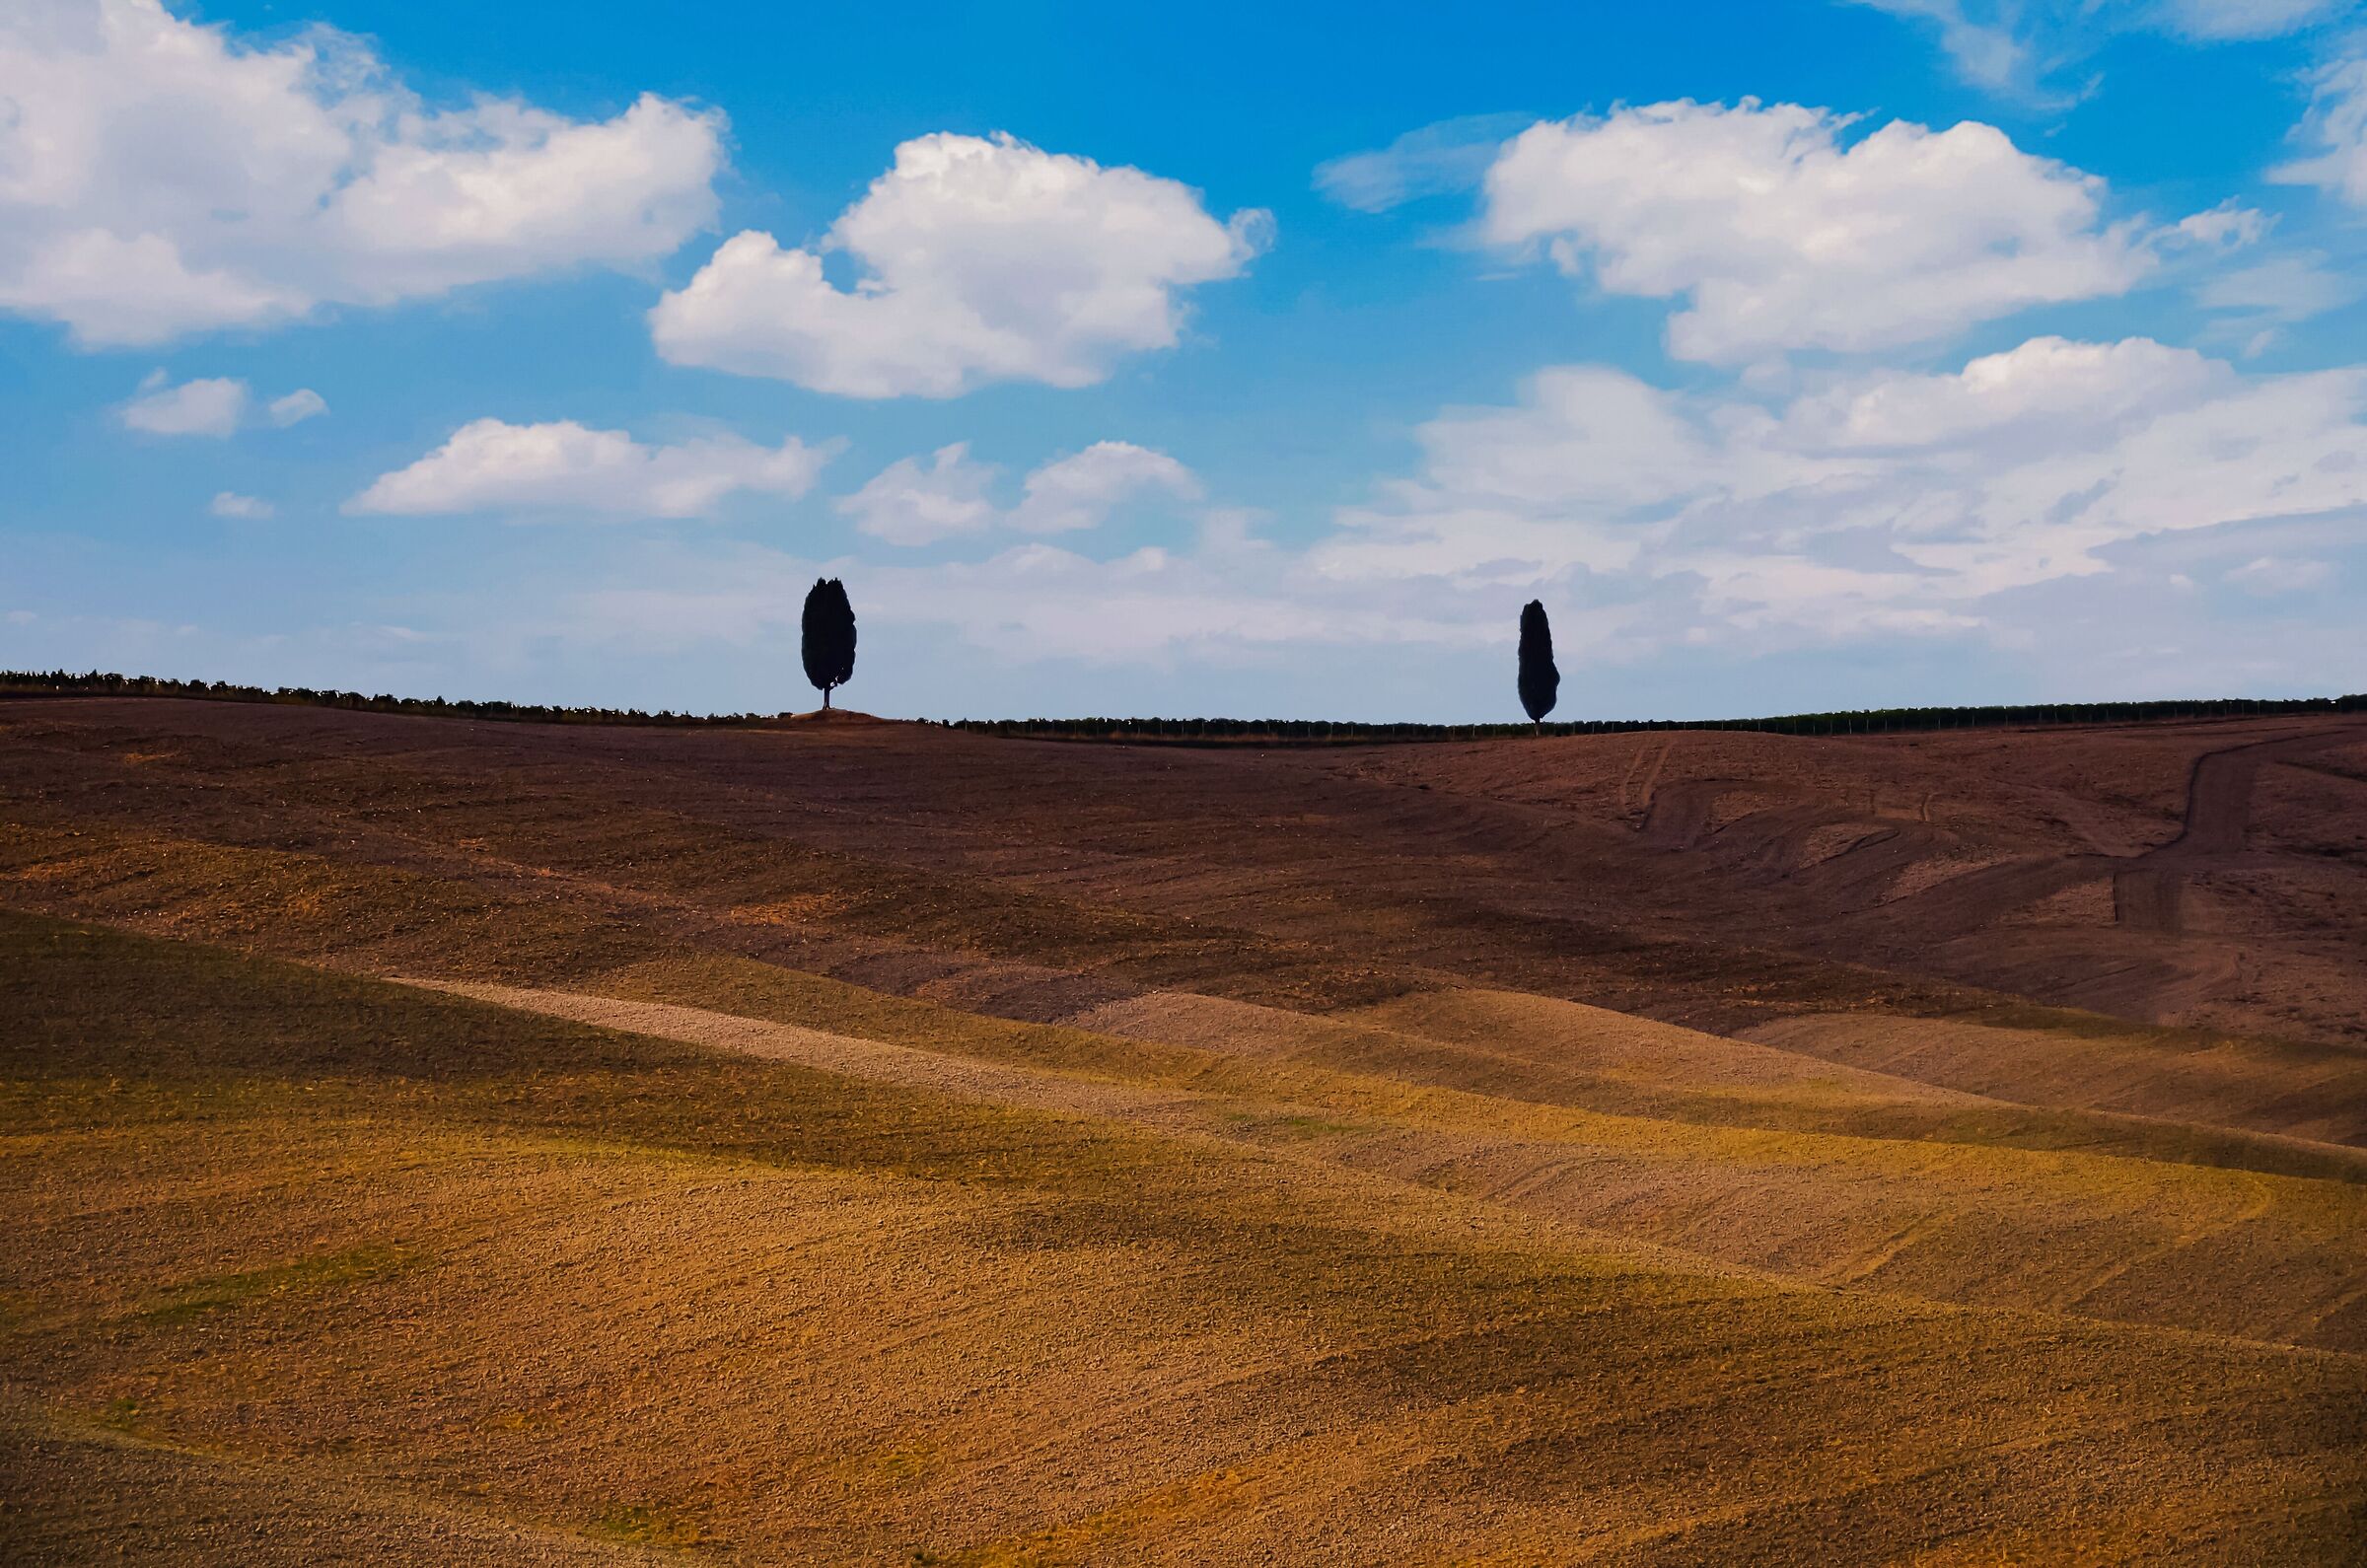 Val d'Orcia ...